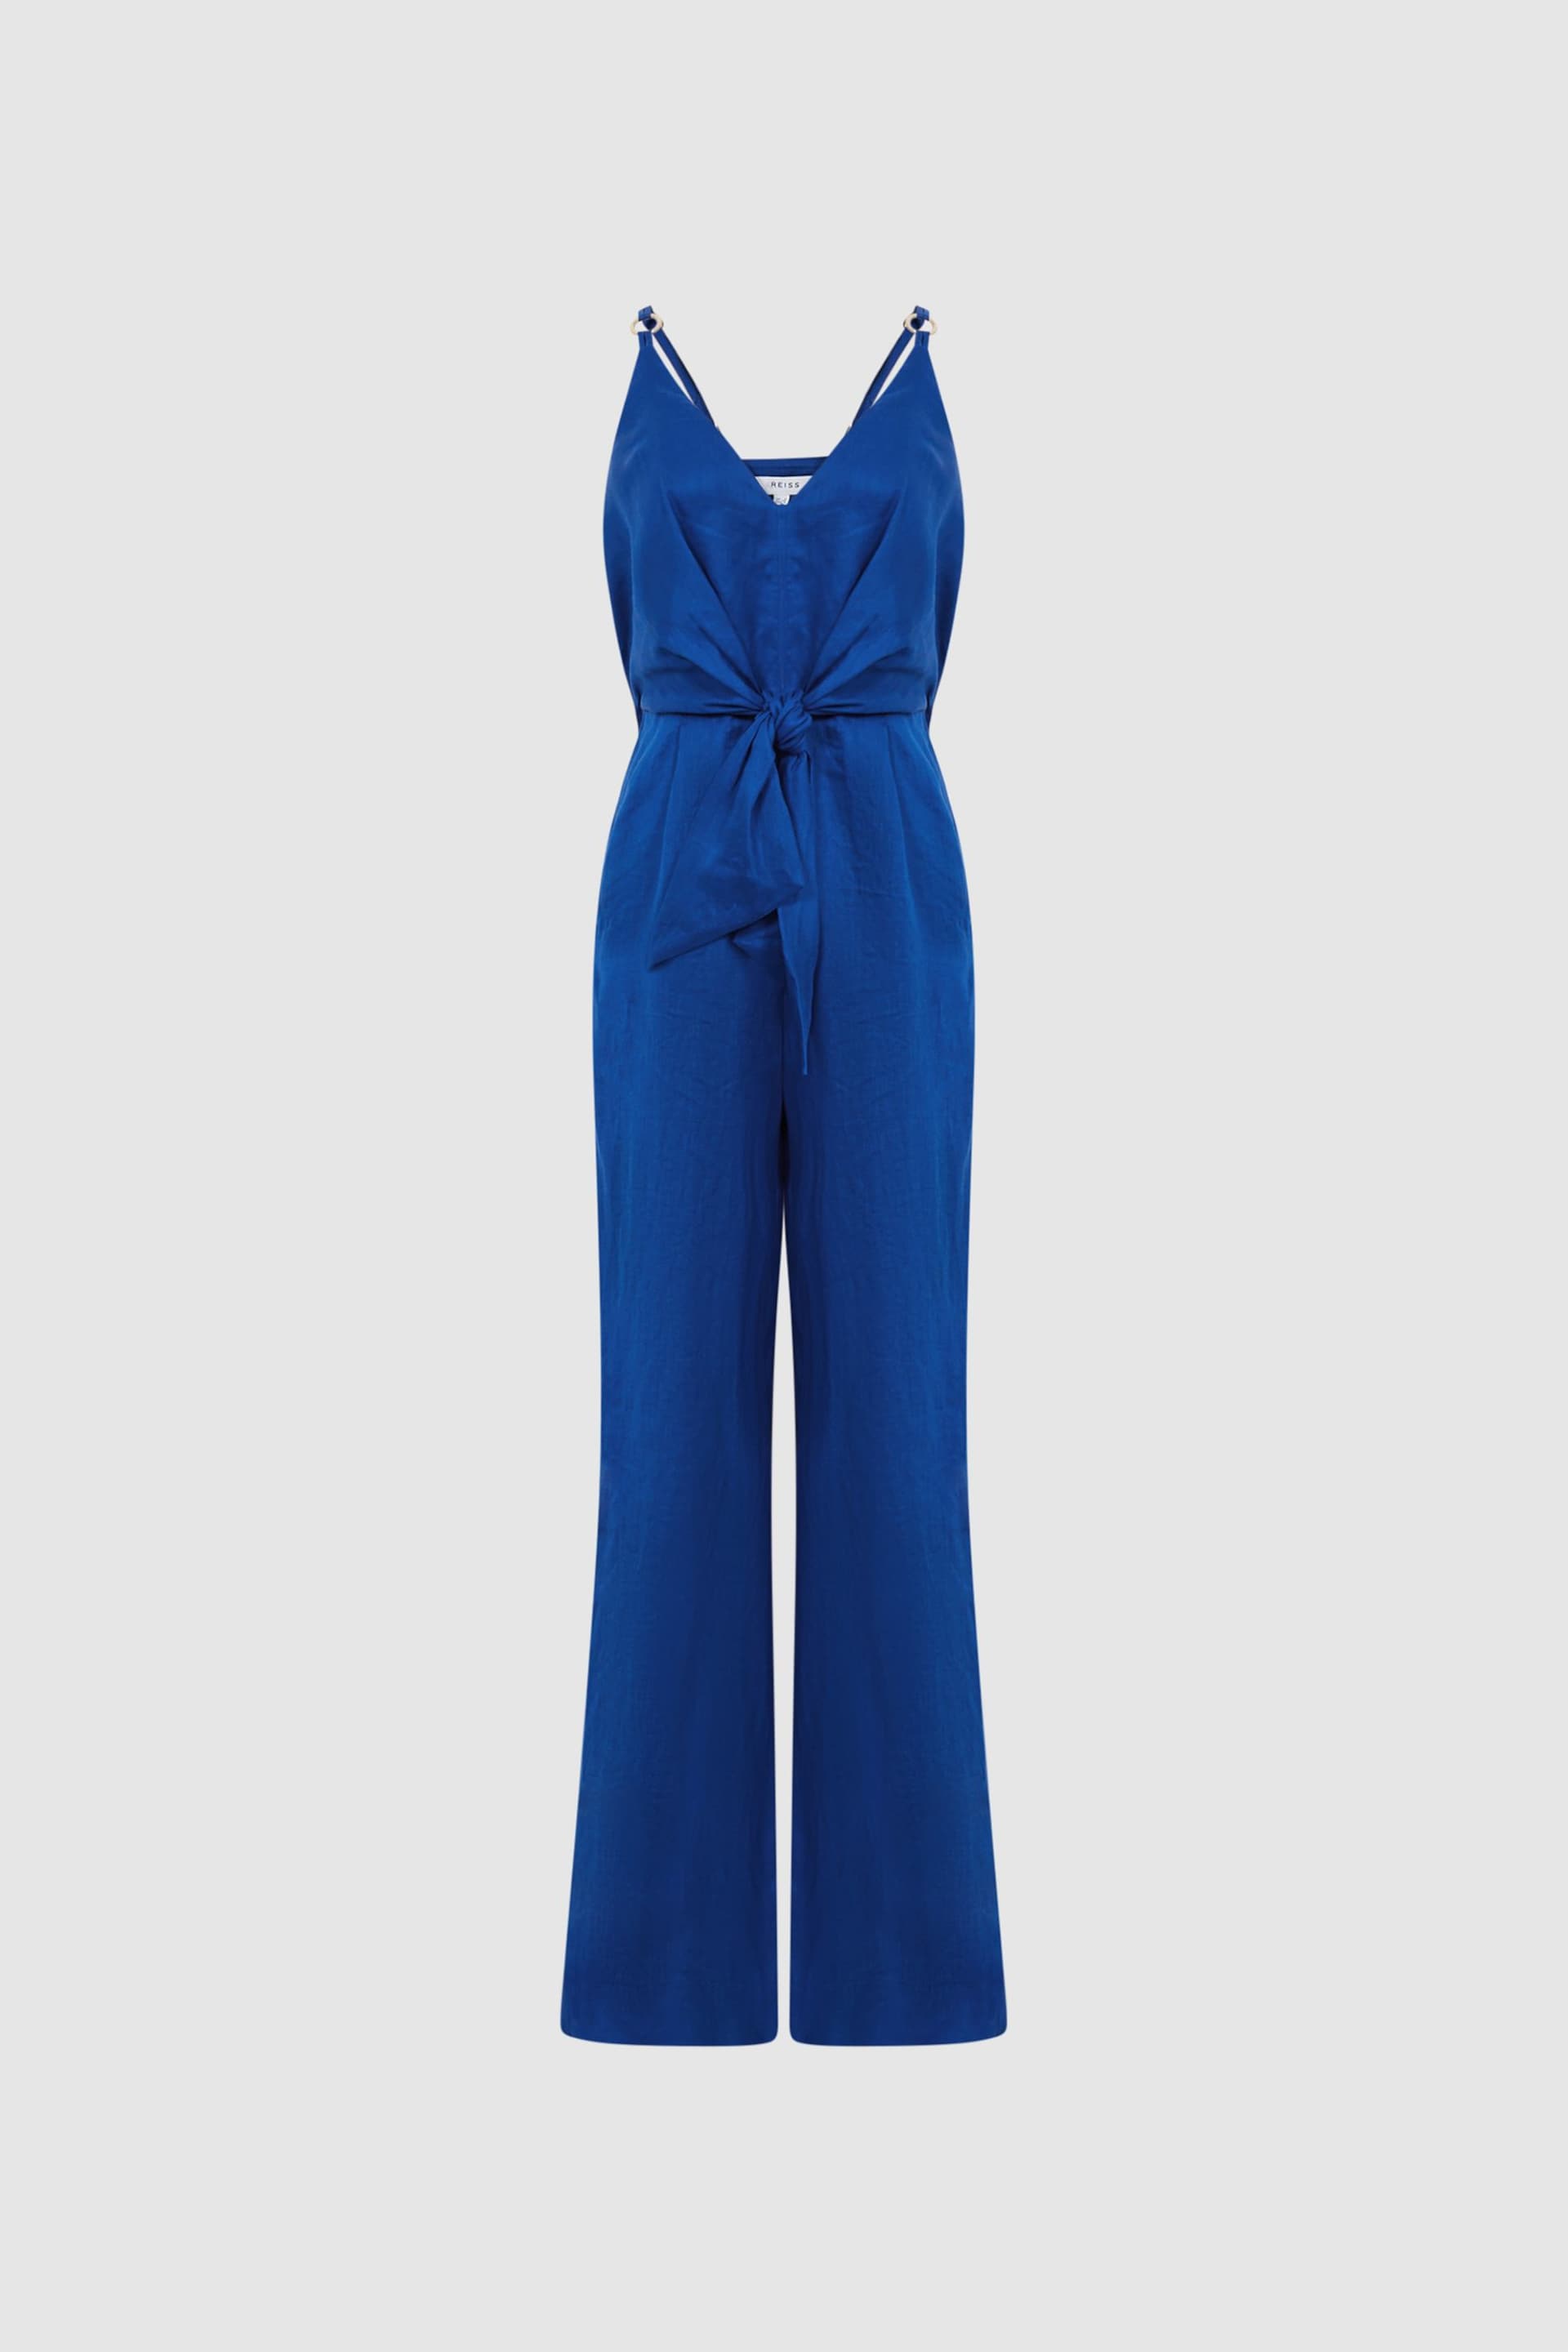 Reiss Bright Blue Ana Linen Jumpsuit - Image 2 of 7